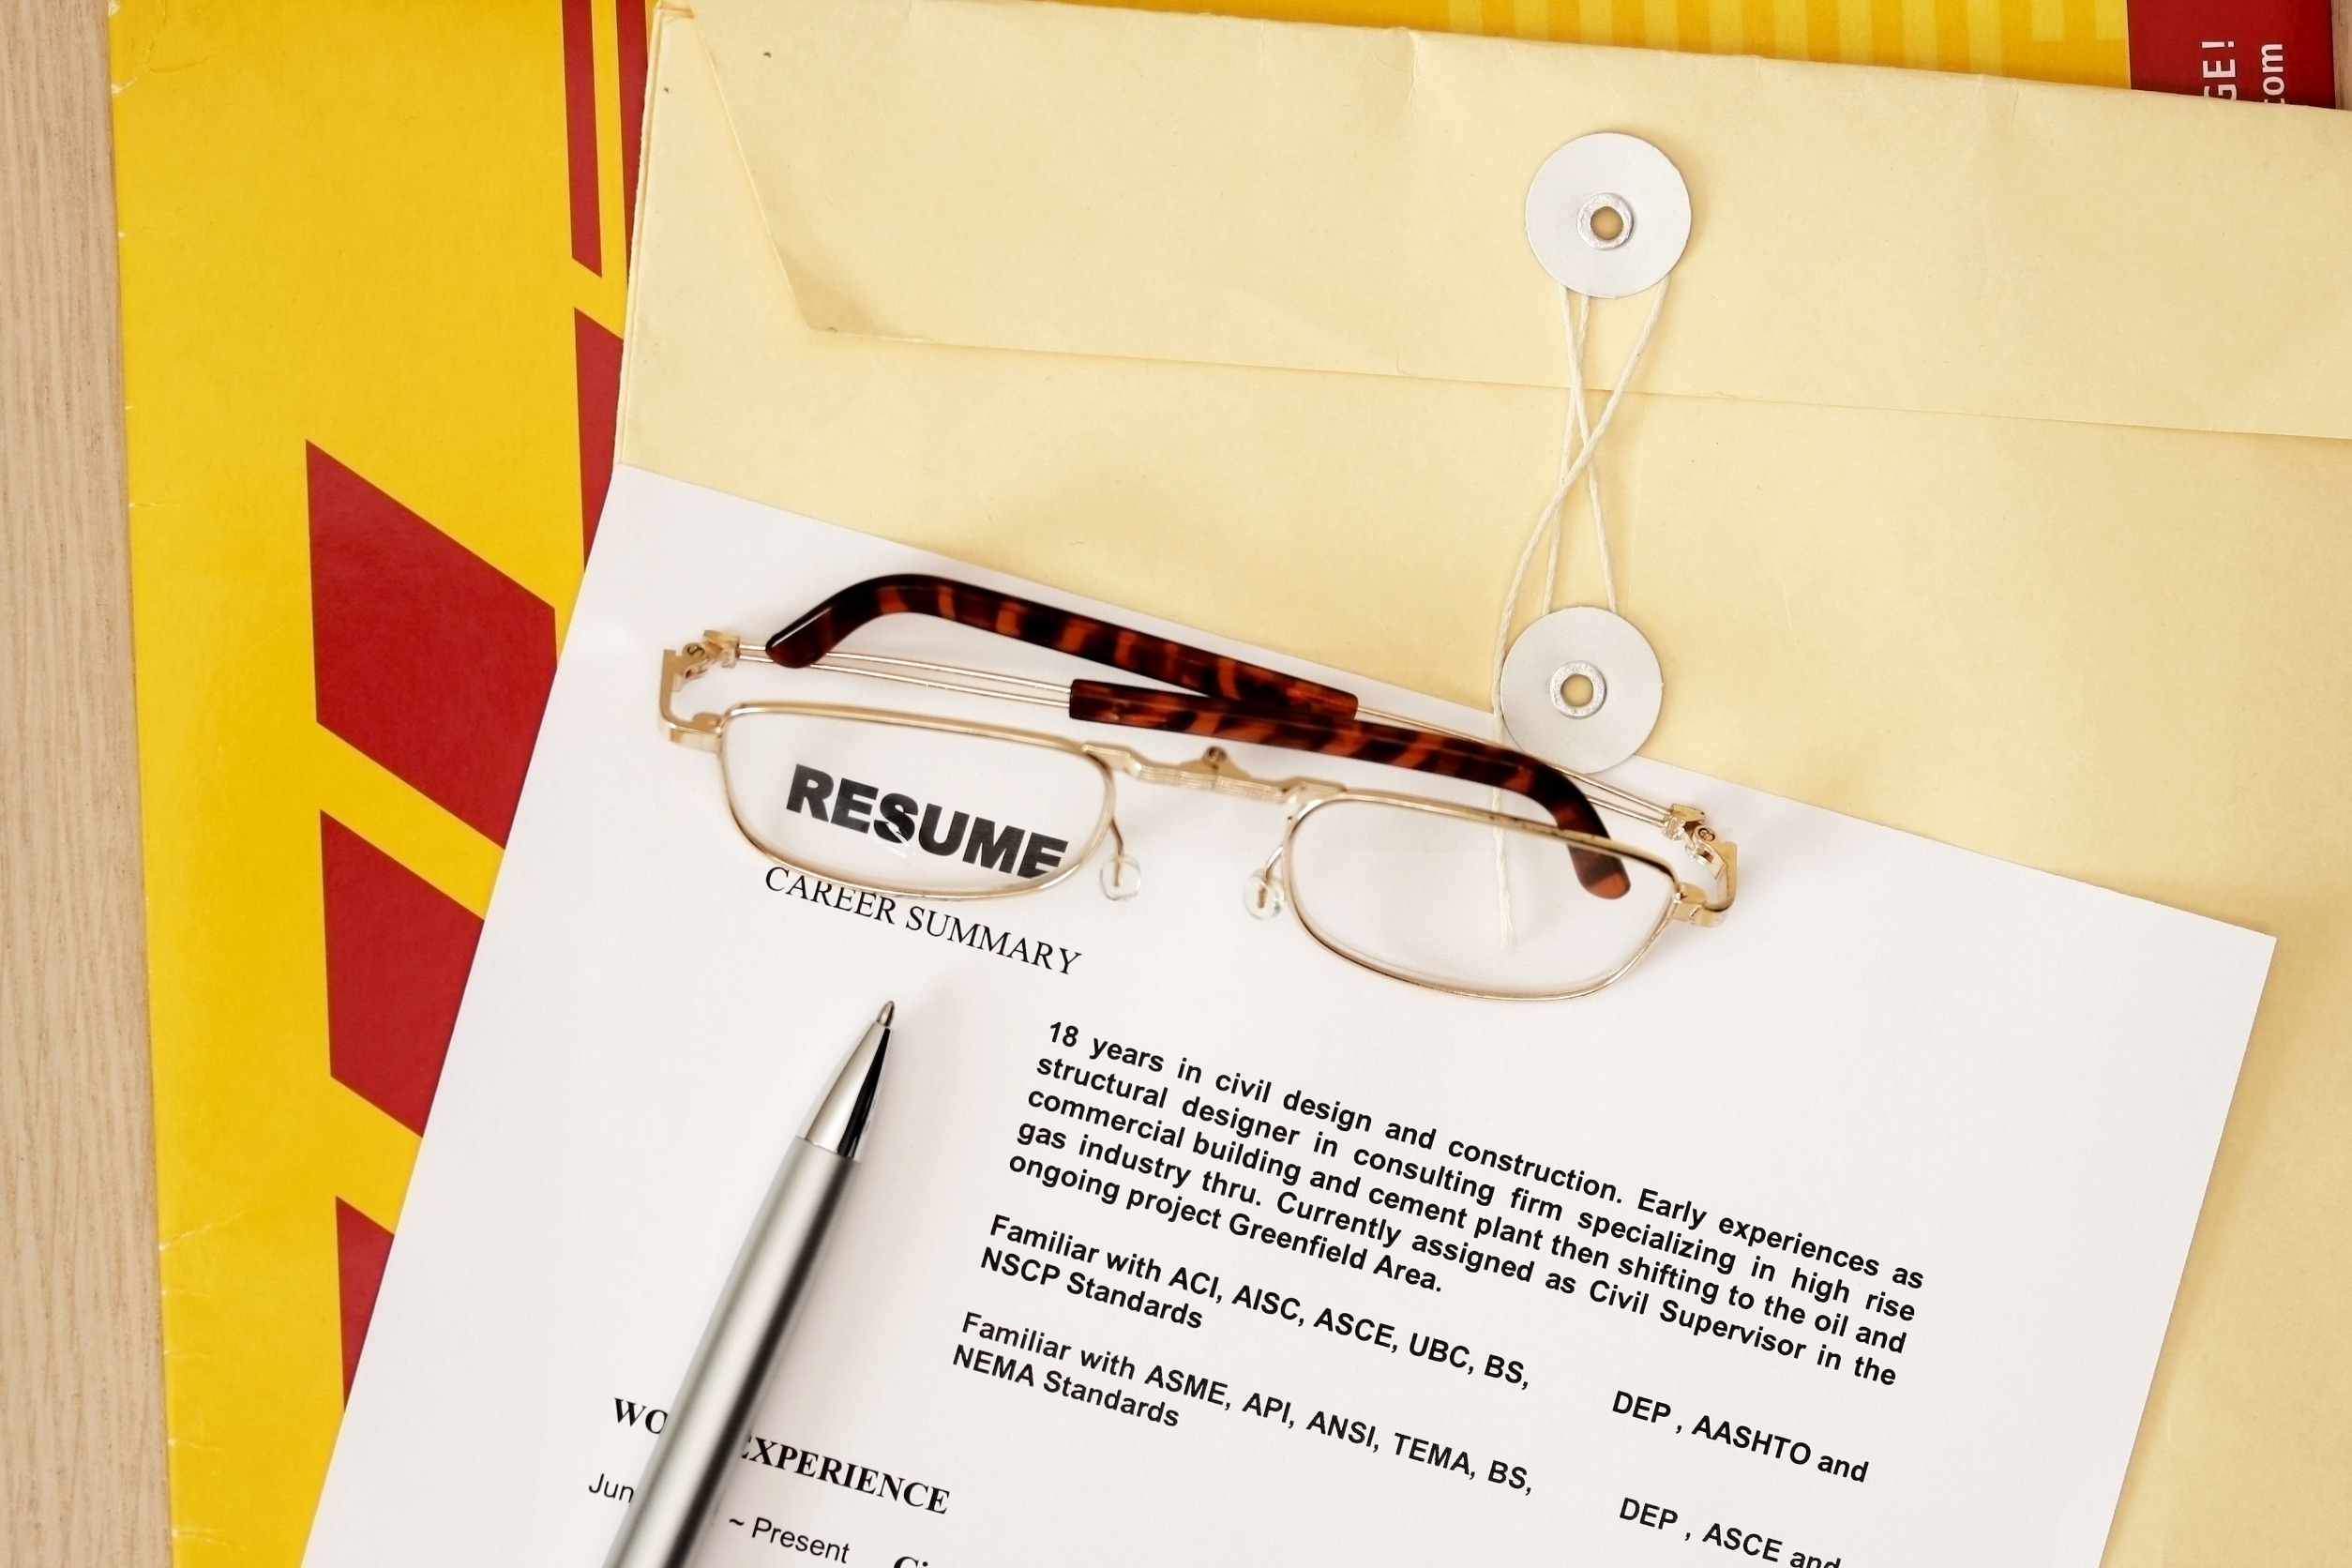 <p>Frequent shifts in language tone, writing style, or formatting throughout the resume can suggest that portions have been copied from other sources or that the document was pieced together from various templates. Consistency is key to a professional resume.</p>